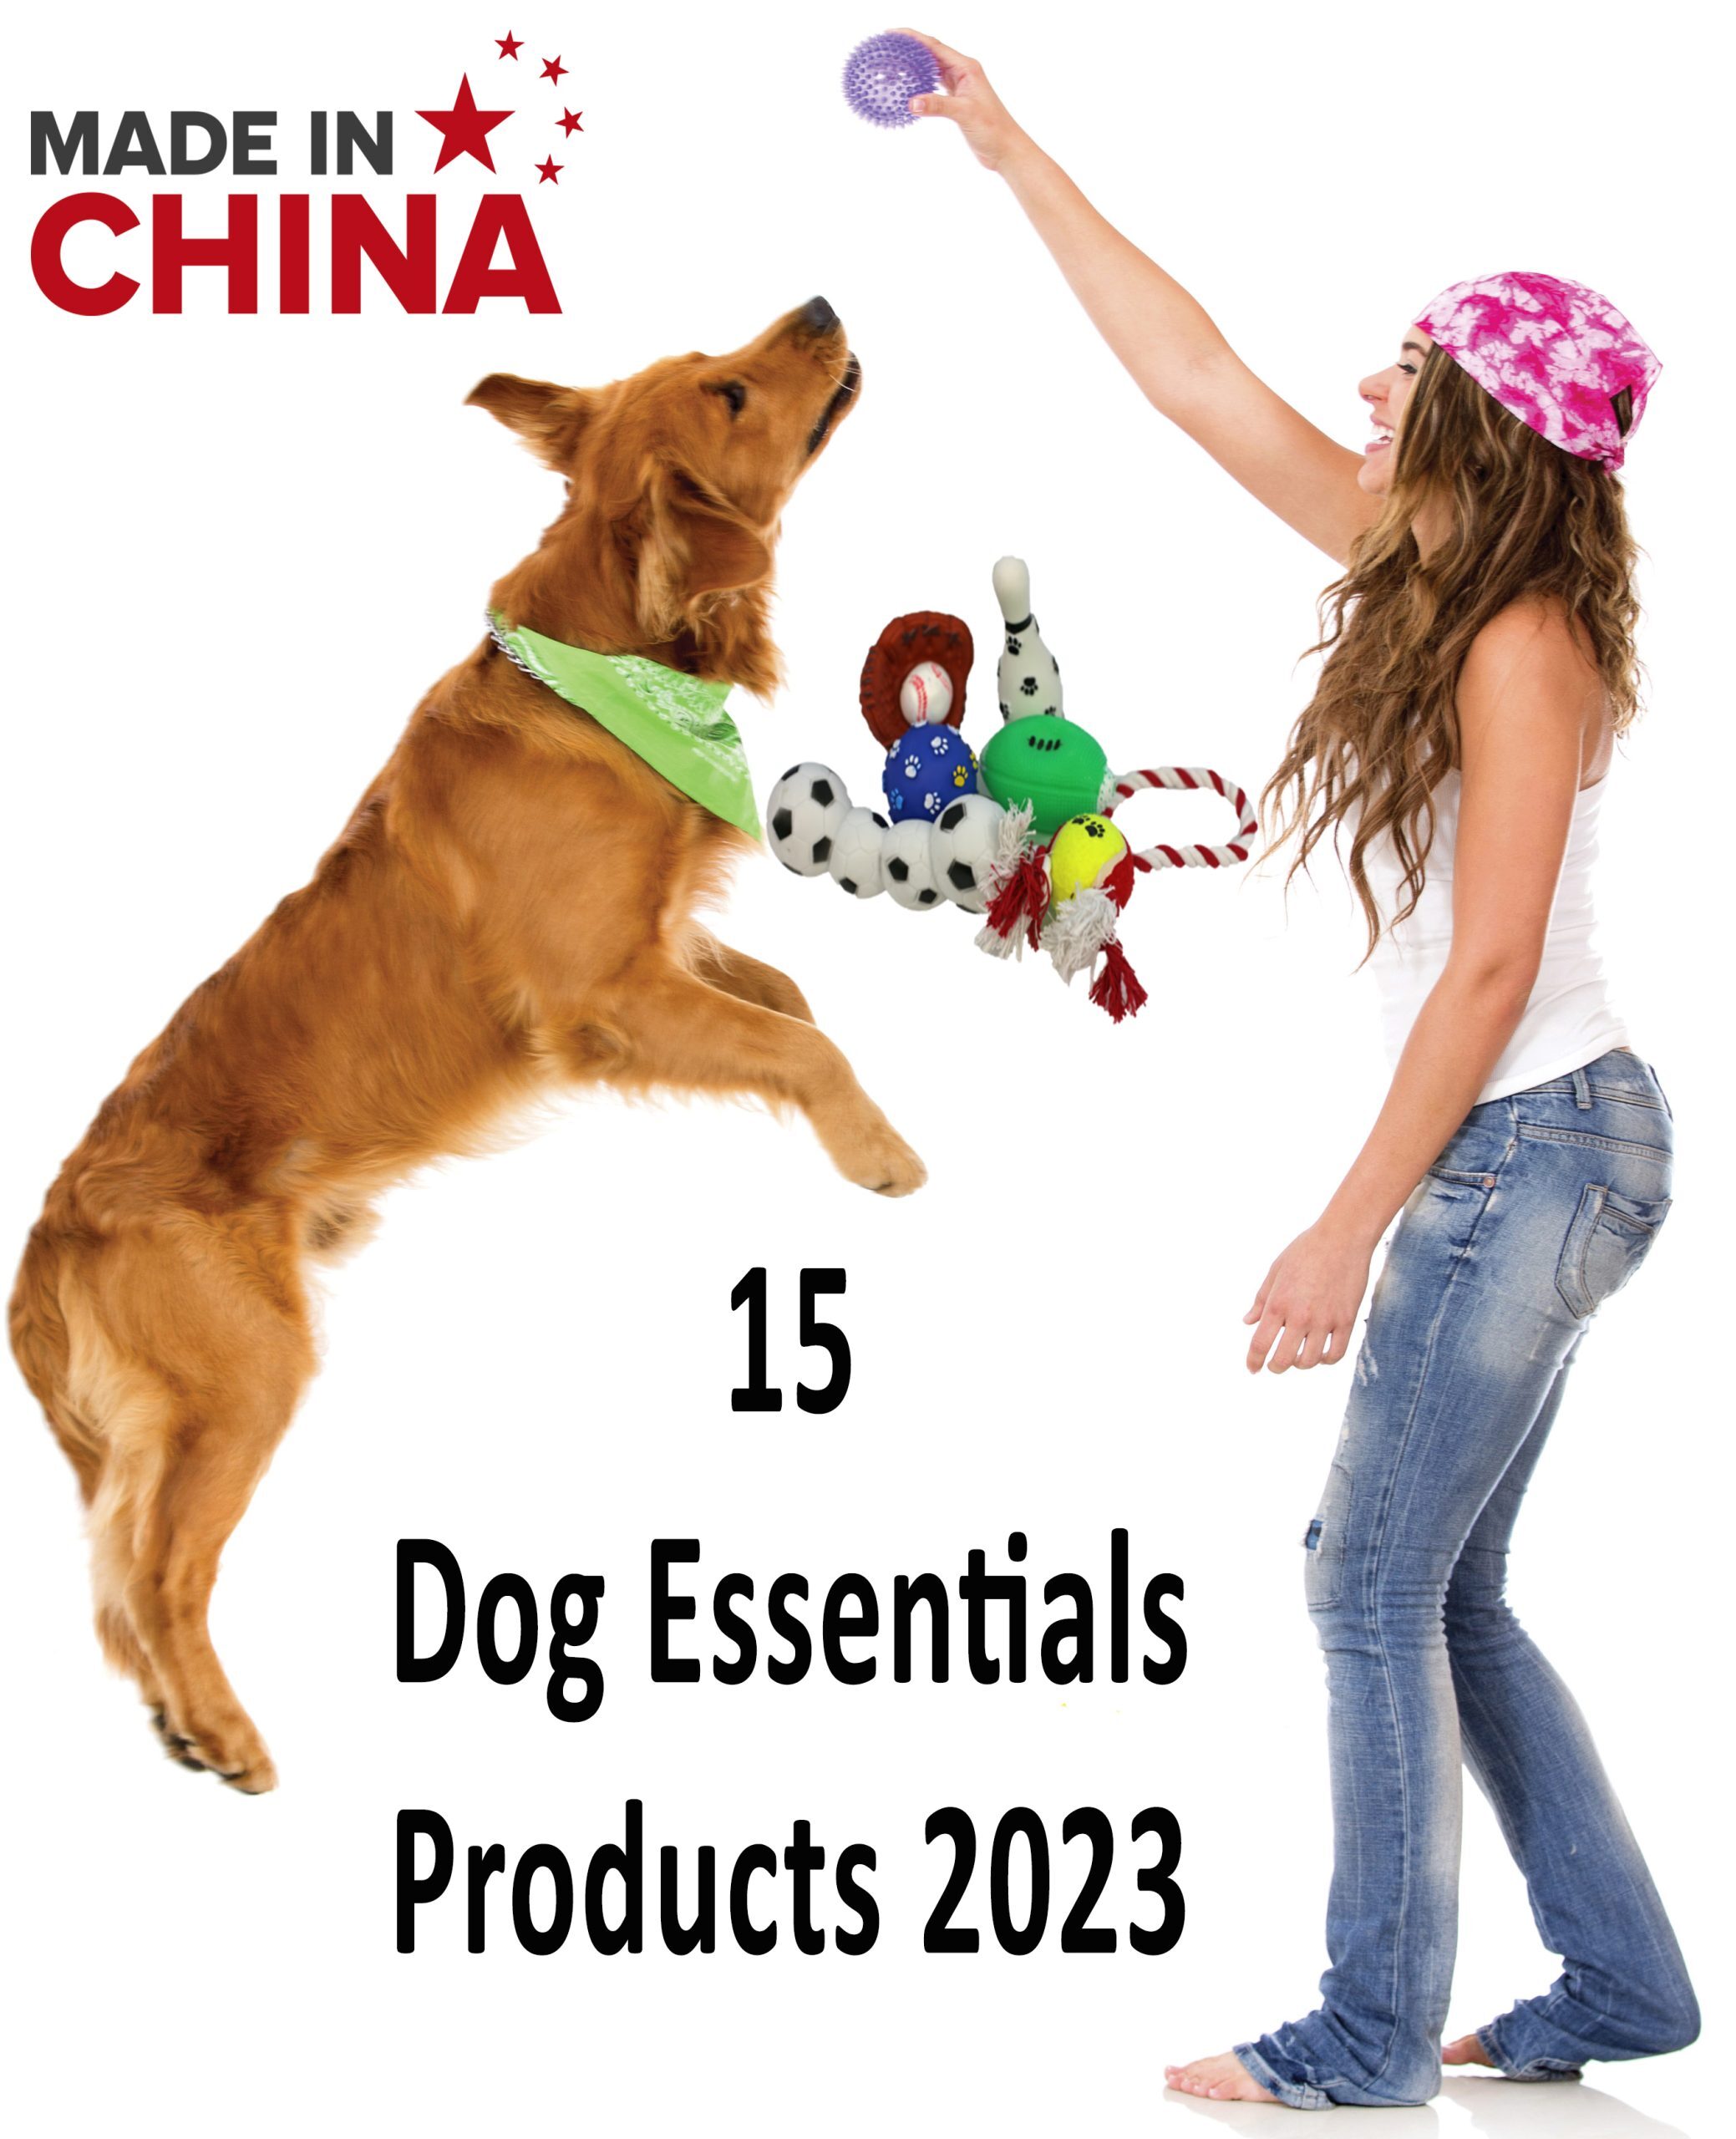 Dog essential products